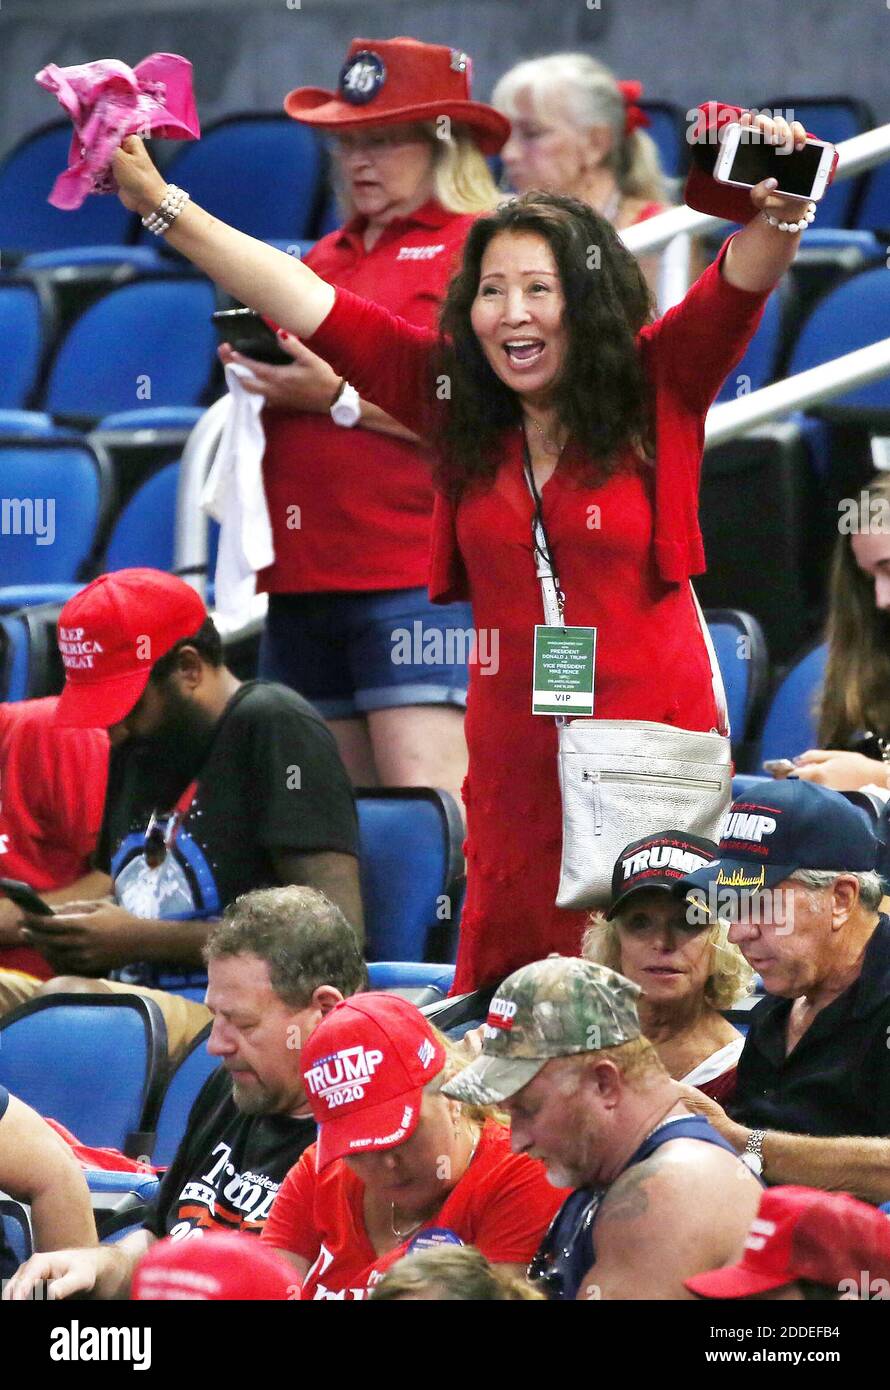 NO FILM, NO VIDEO, NO TV, NO DOCUMENTARY - Trump supporters cheer inside the Amway Center before the President Trump campaign rally in downtown Orlando, FL, USA on Tuesday, June 18, 2019. Photo by Stephen M. Dowell/Orlando Sentinel/TNS/ABACAPRESS.COM Stock Photo